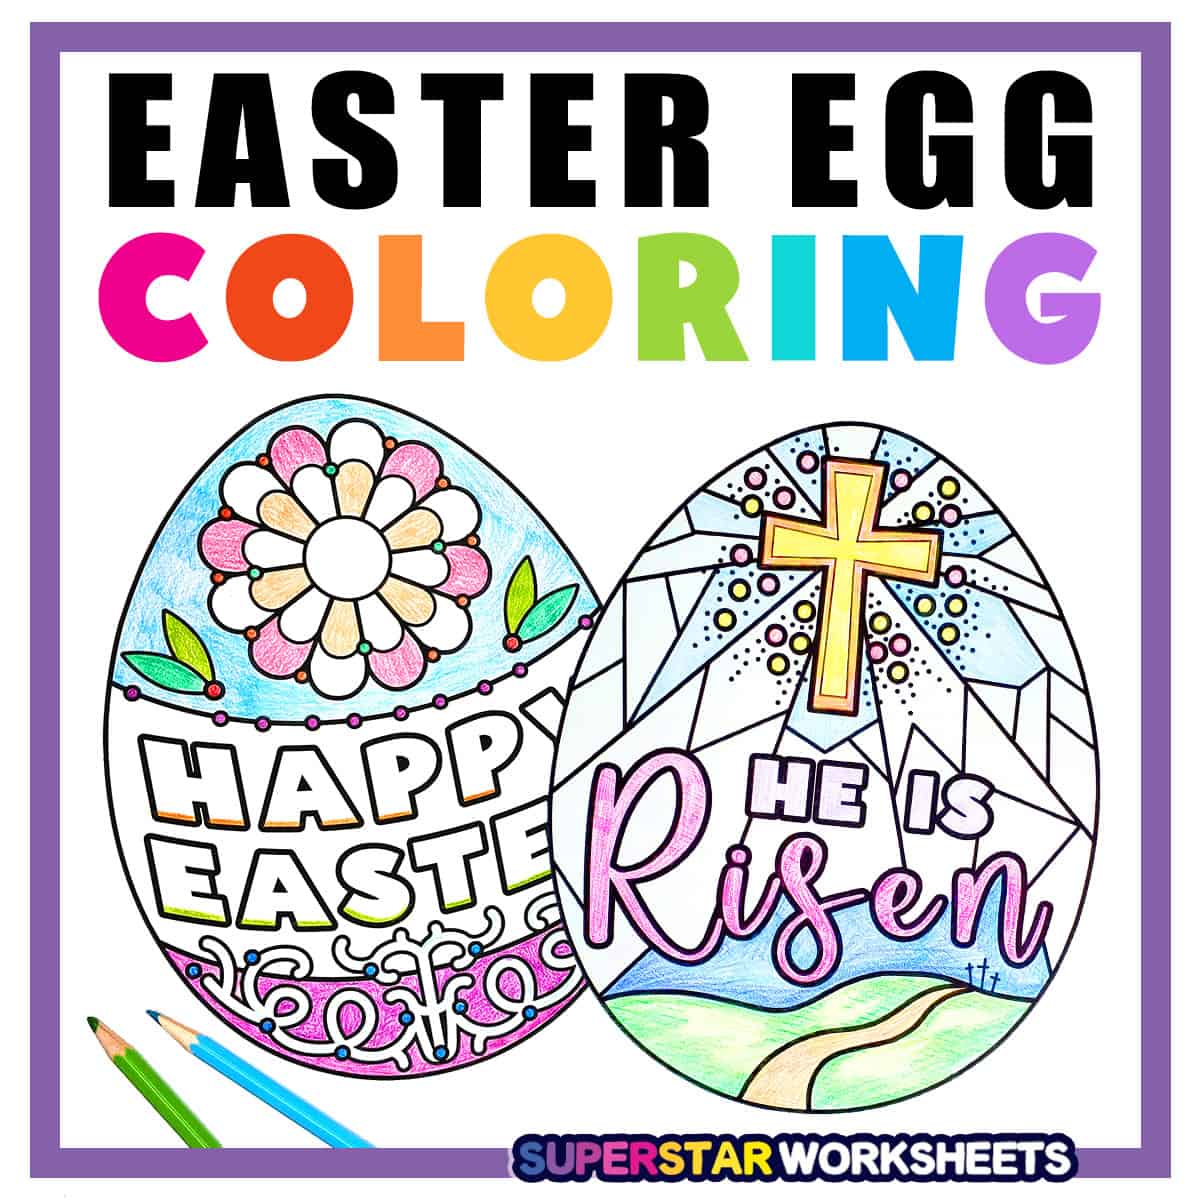 4 colorful, printable Easter cards to give to friends and family